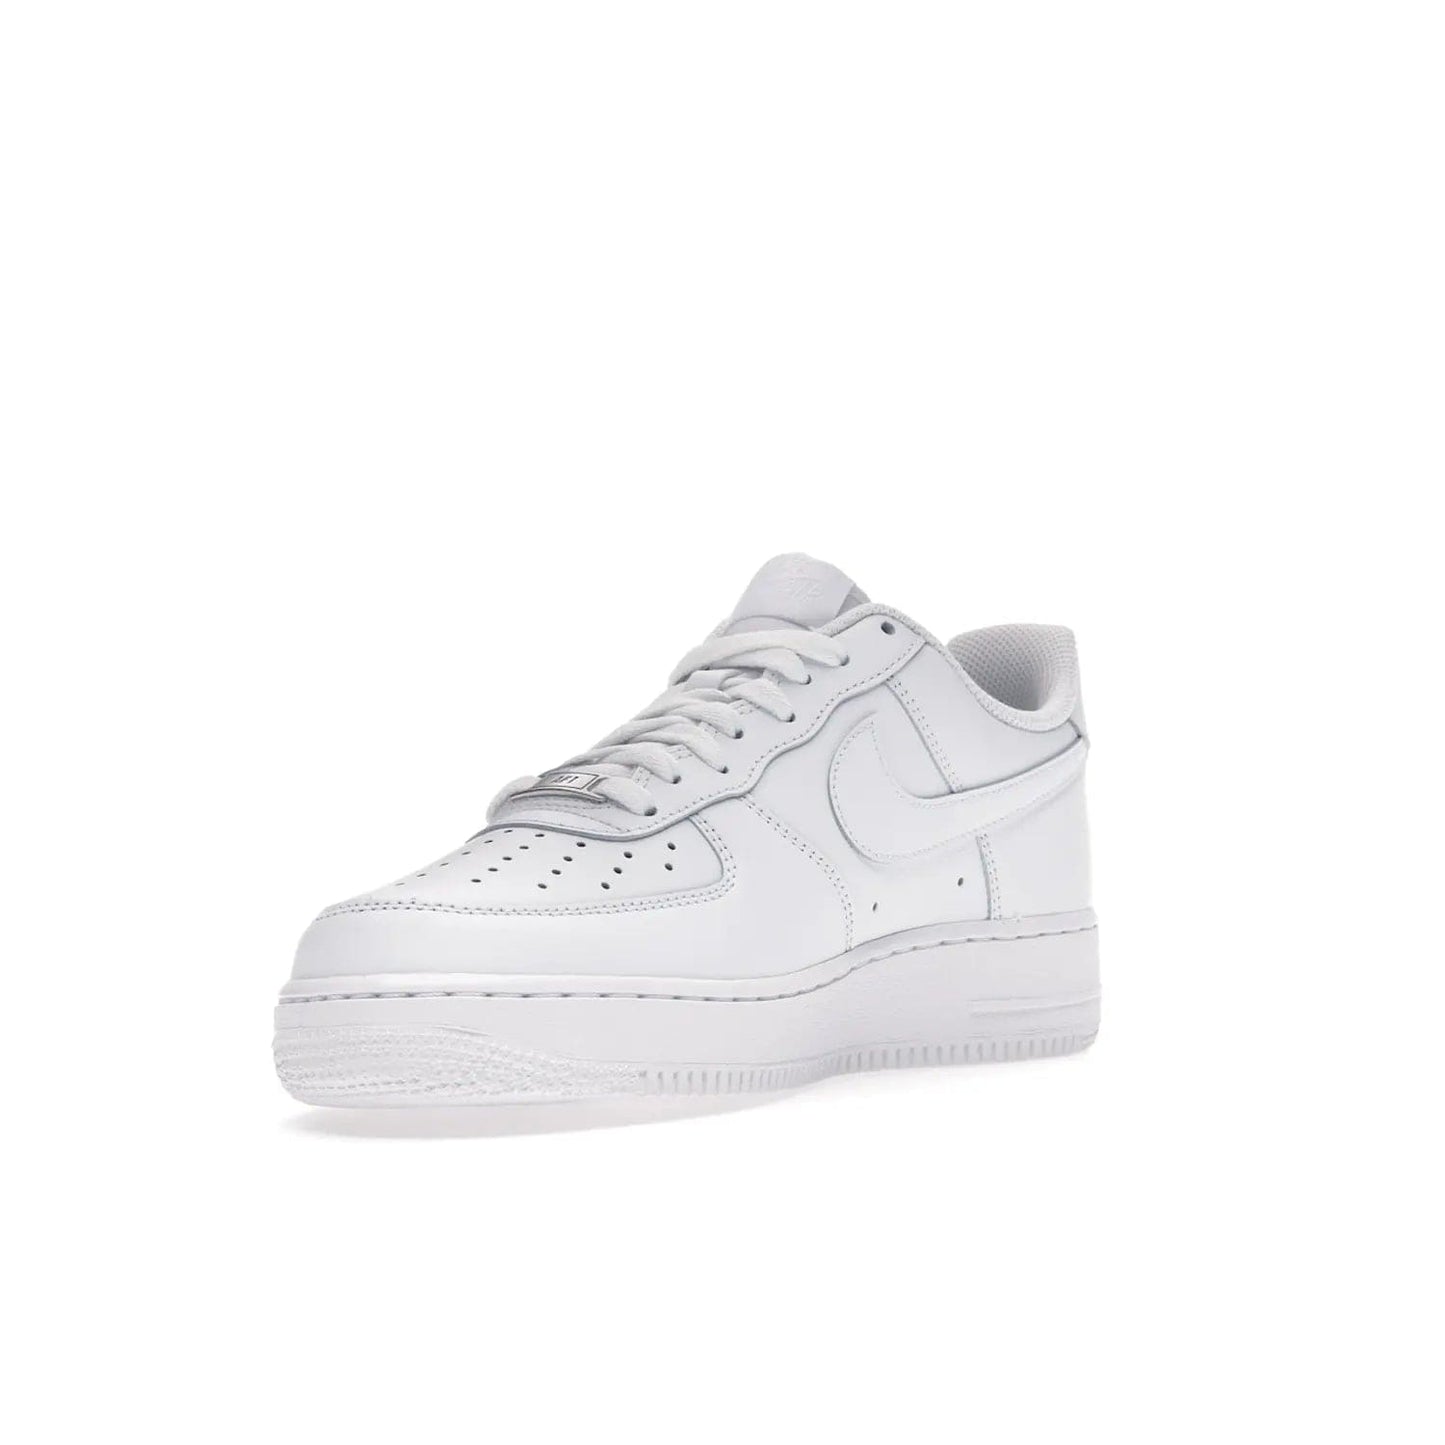 Nike Air Force 1 Low '07 White - Image 14 - Only at www.BallersClubKickz.com - ##
Iconic Swoosh overlays and crisp white sole make the classic Nike Air Force 1 Low White '07 an essential colorway. Classic for seasoned heads and new fans alike.